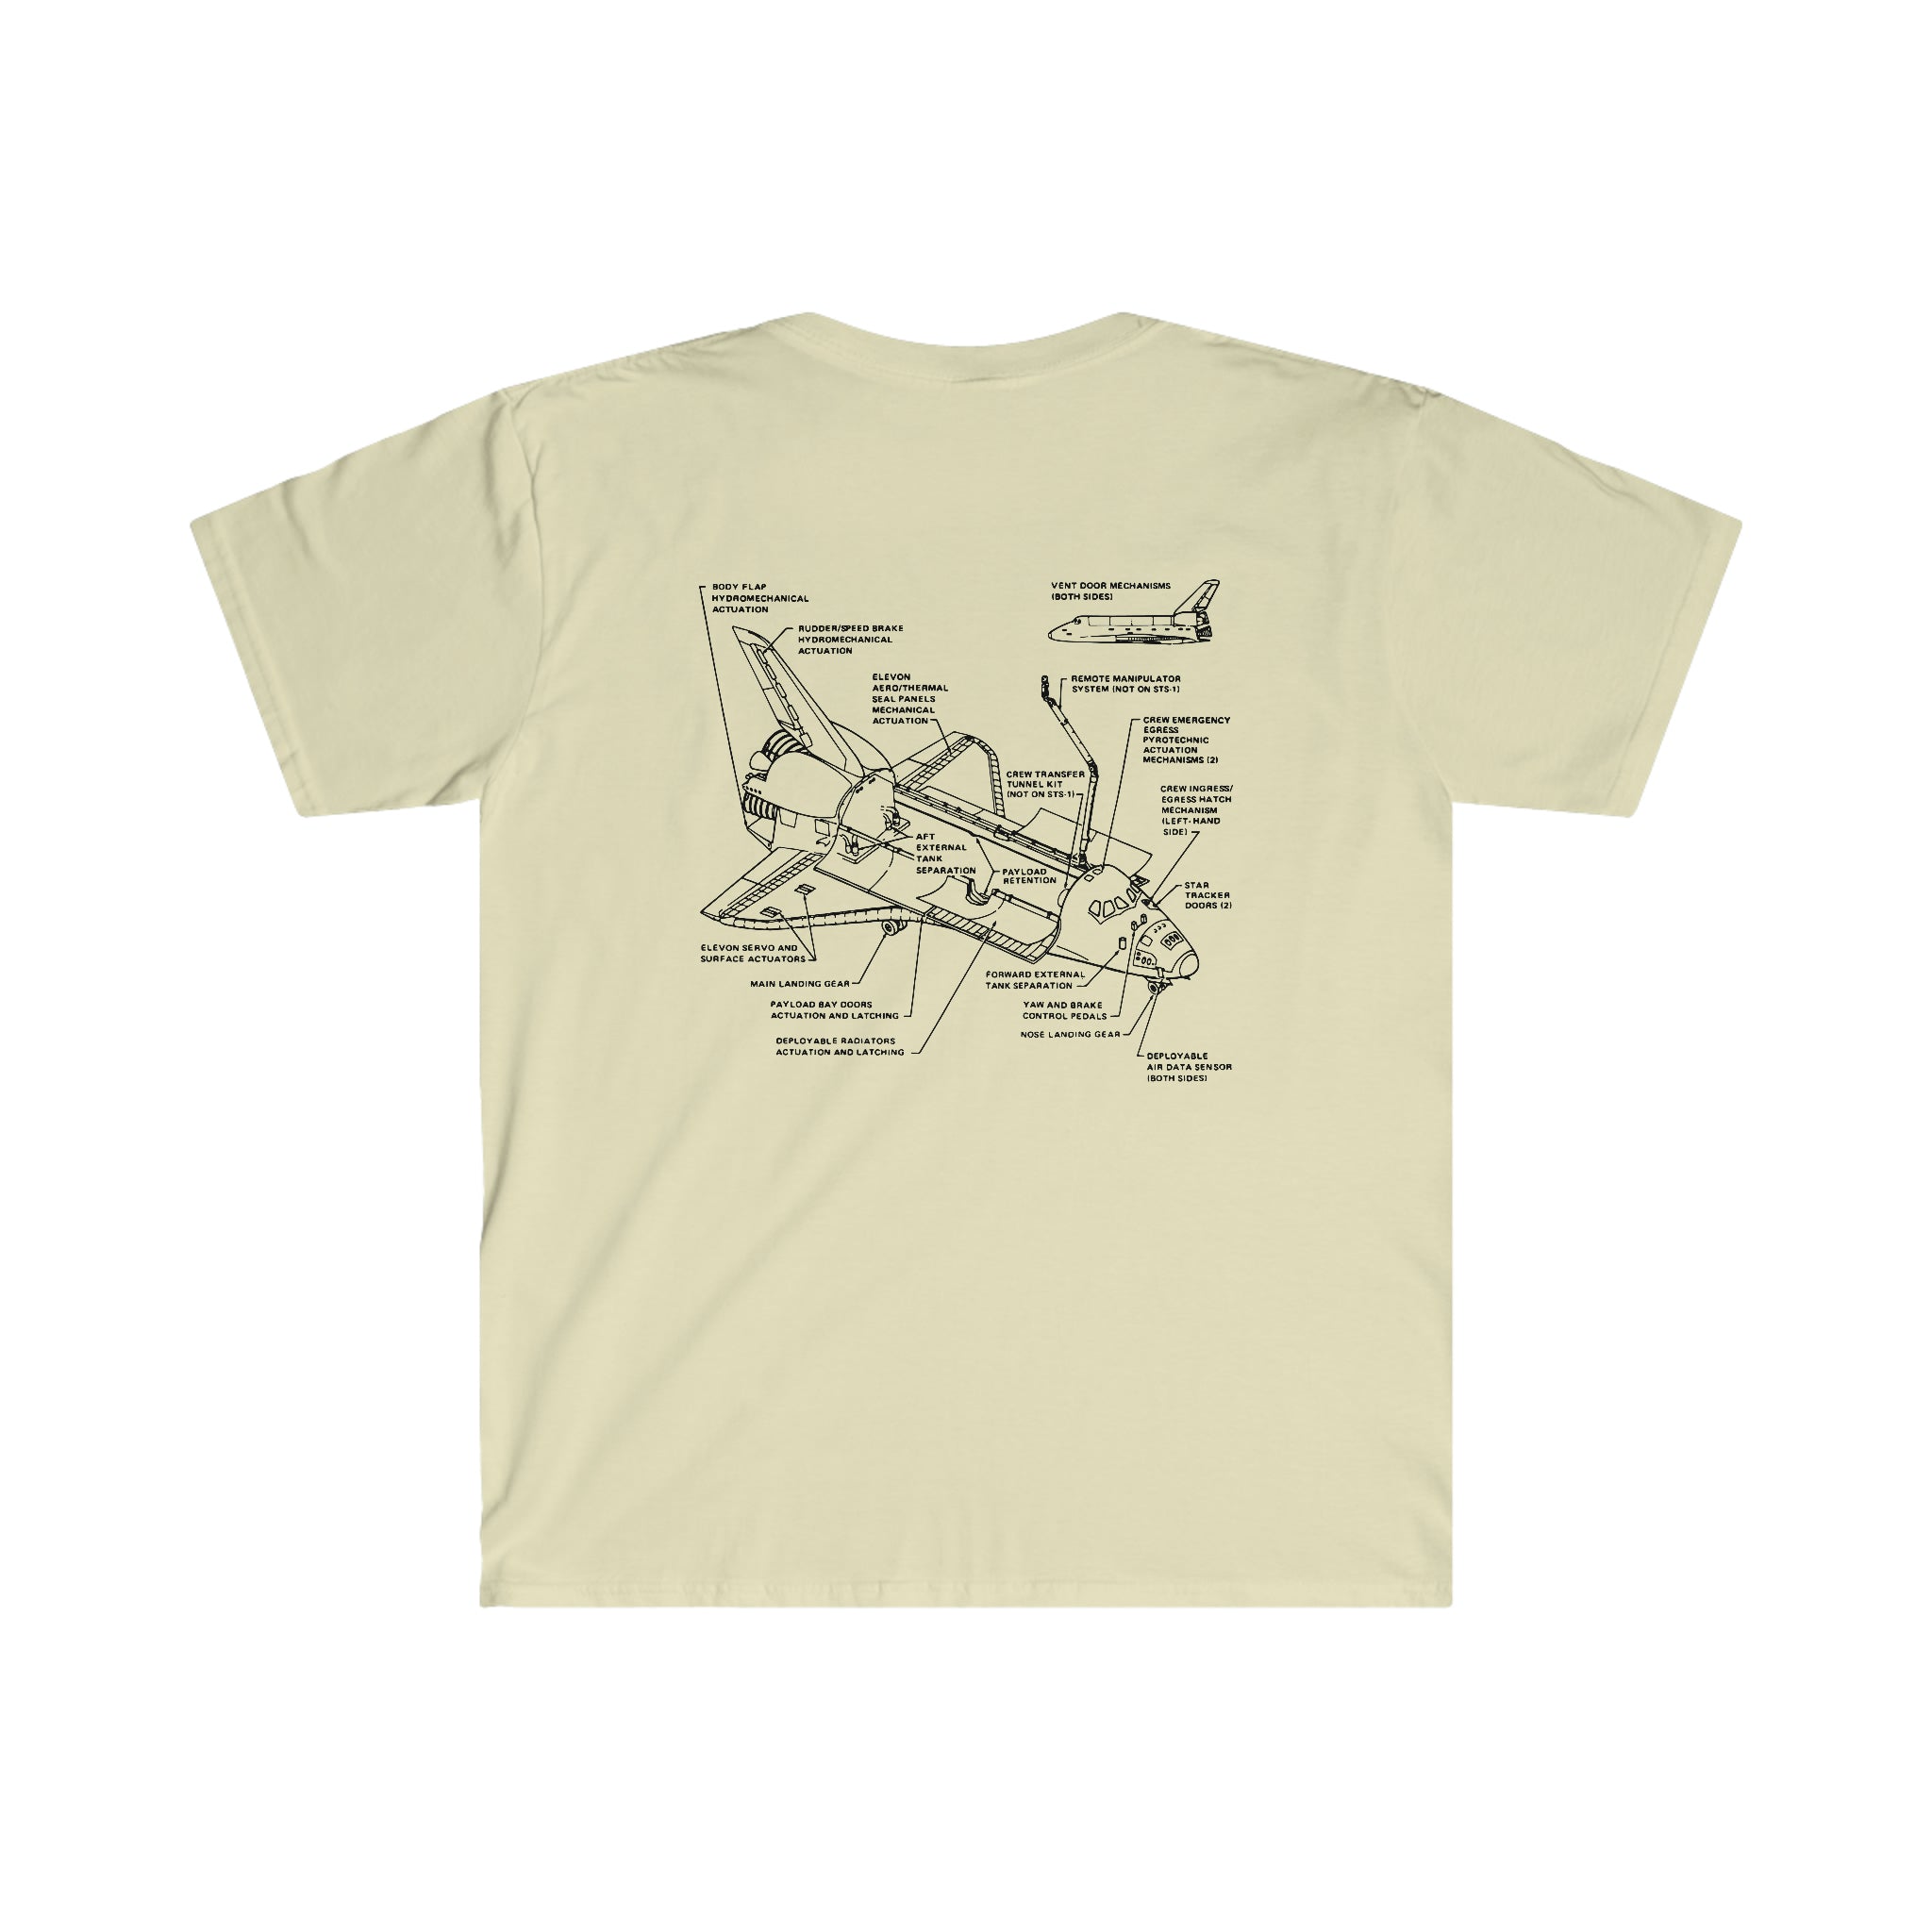 Space Shuttle in Deep Space T-Shirt